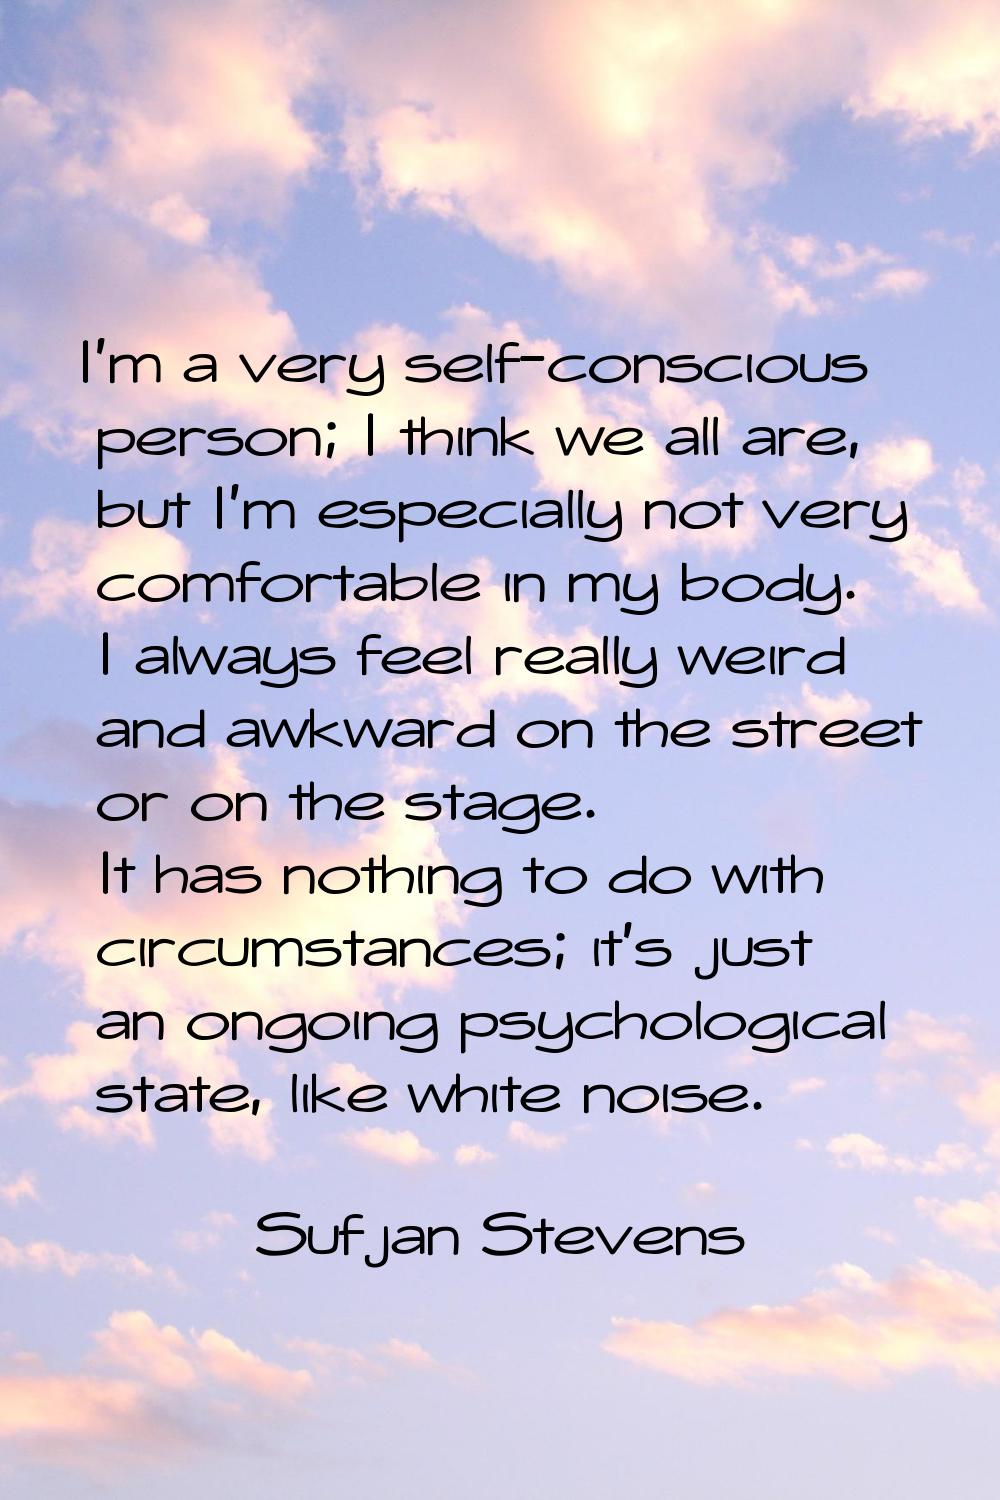 I'm a very self-conscious person; I think we all are, but I'm especially not very comfortable in my